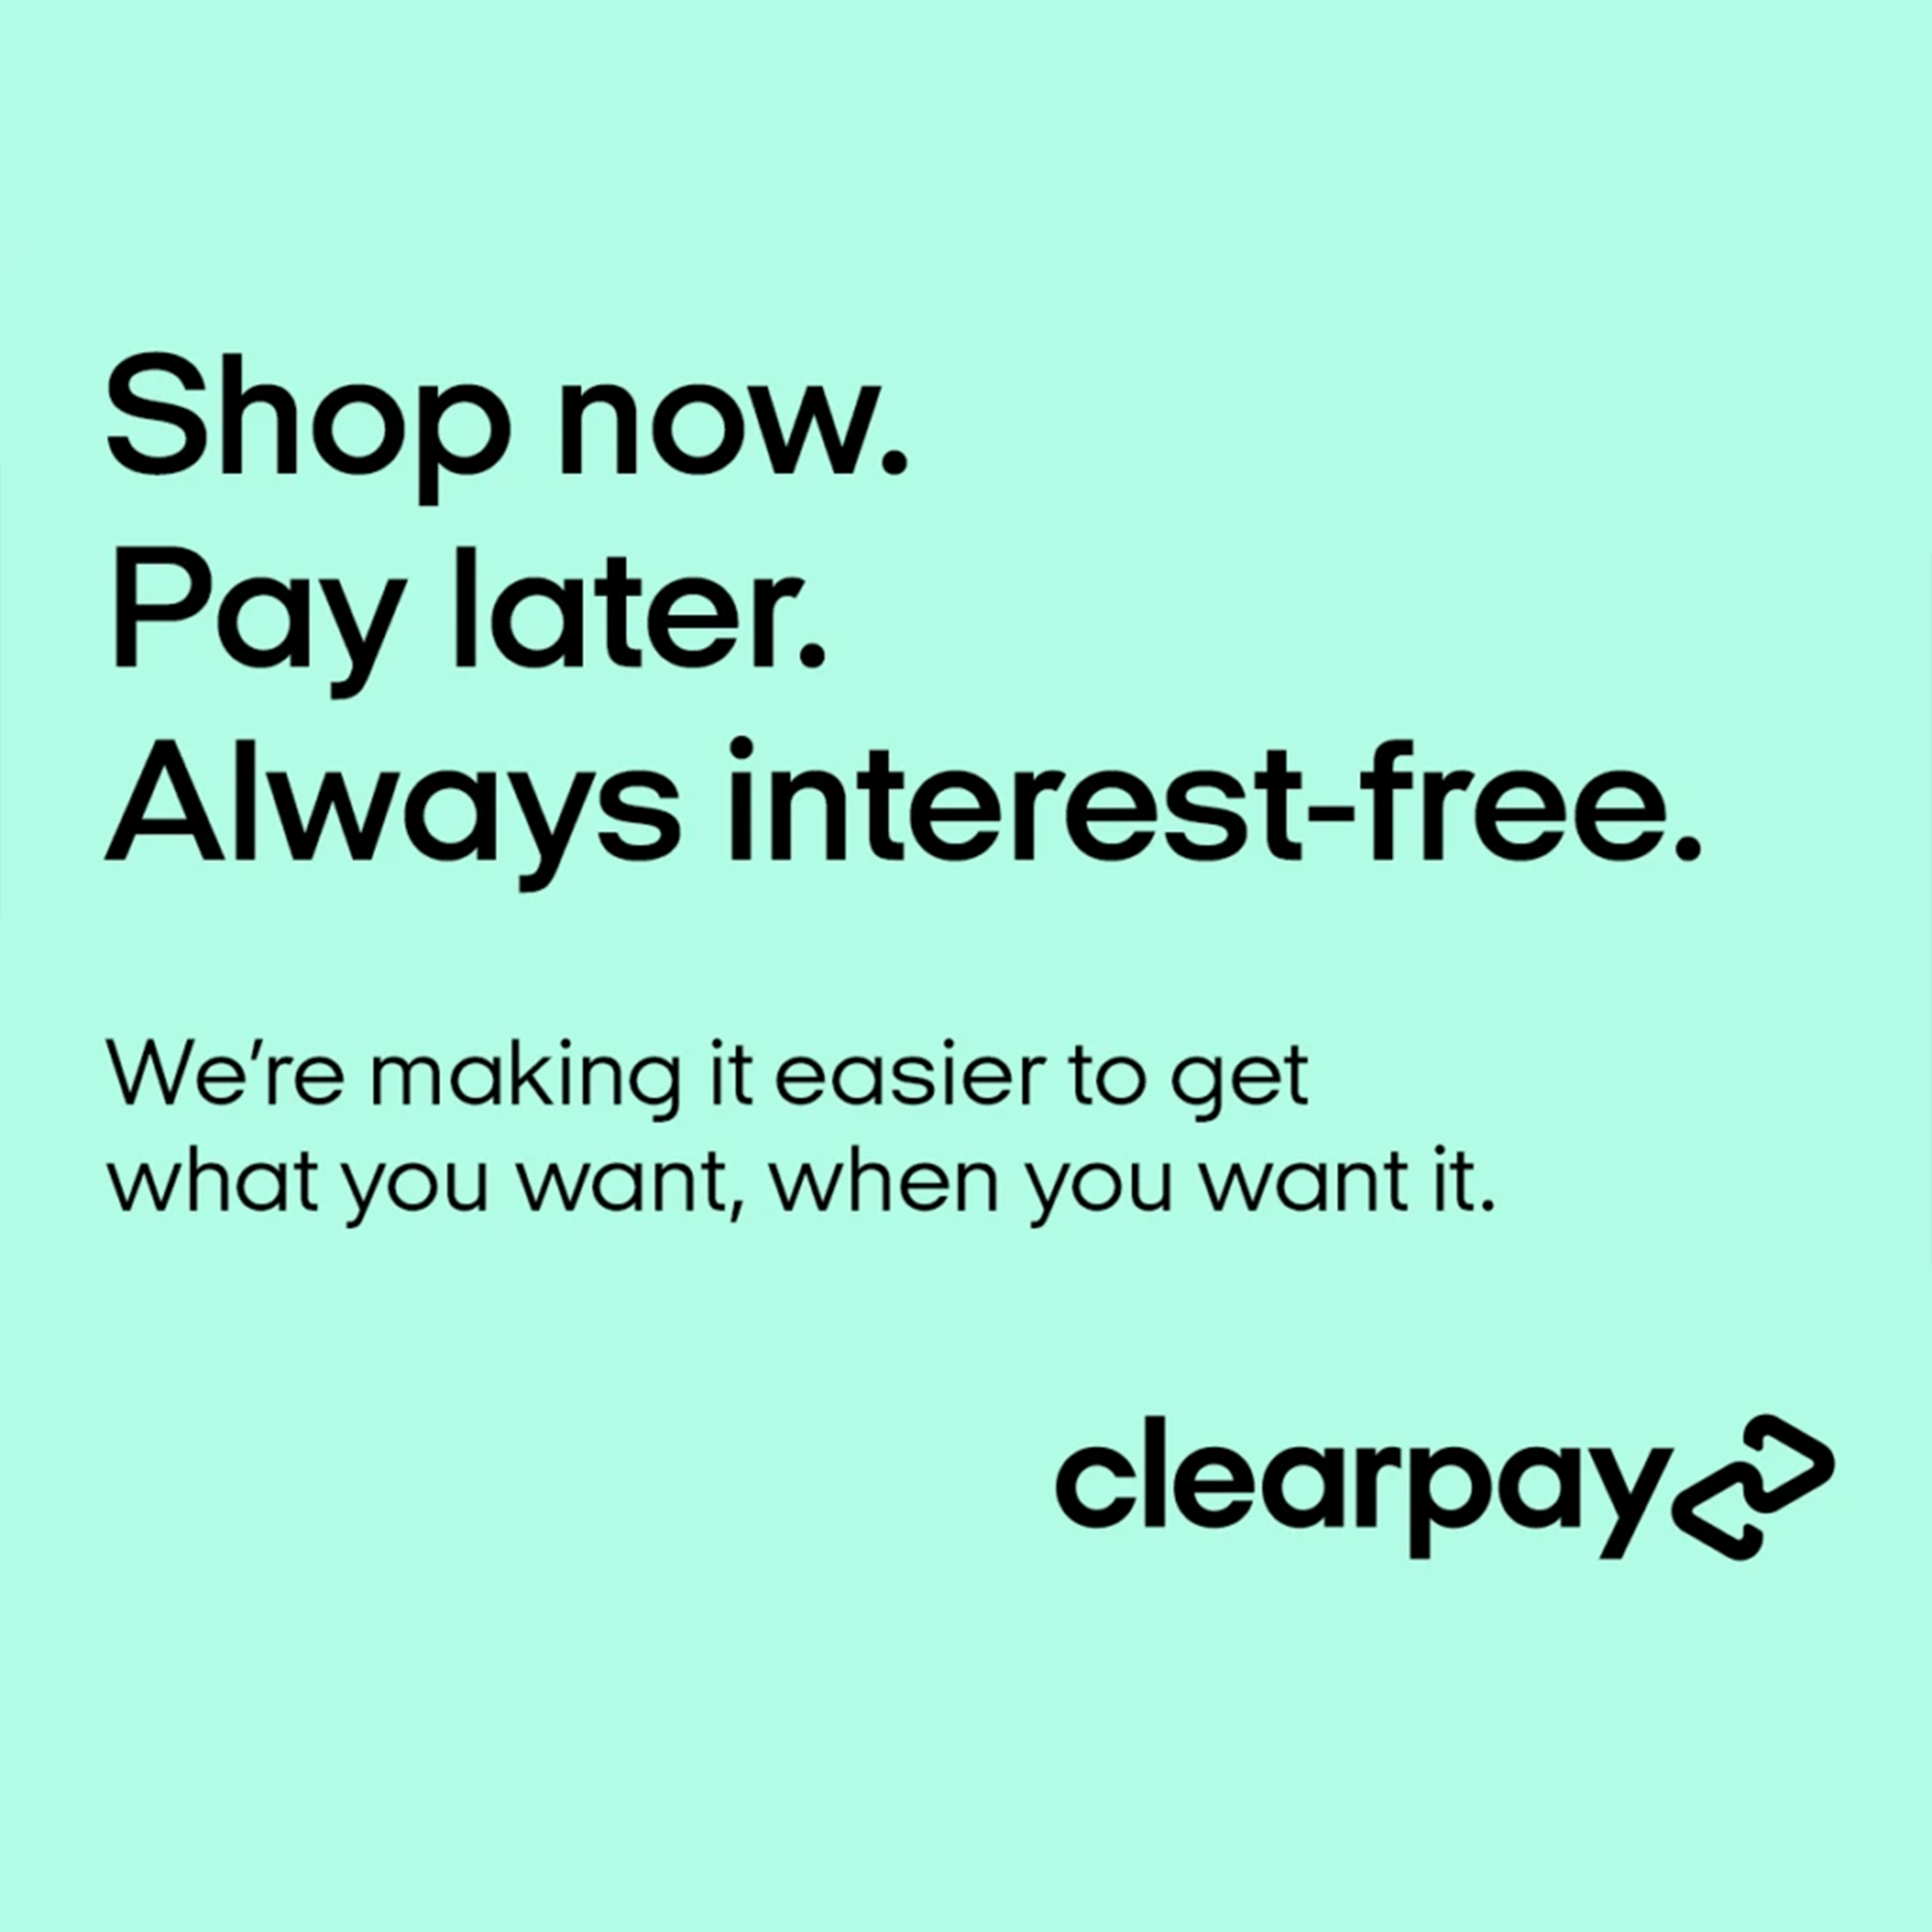 Payments by Clearpay